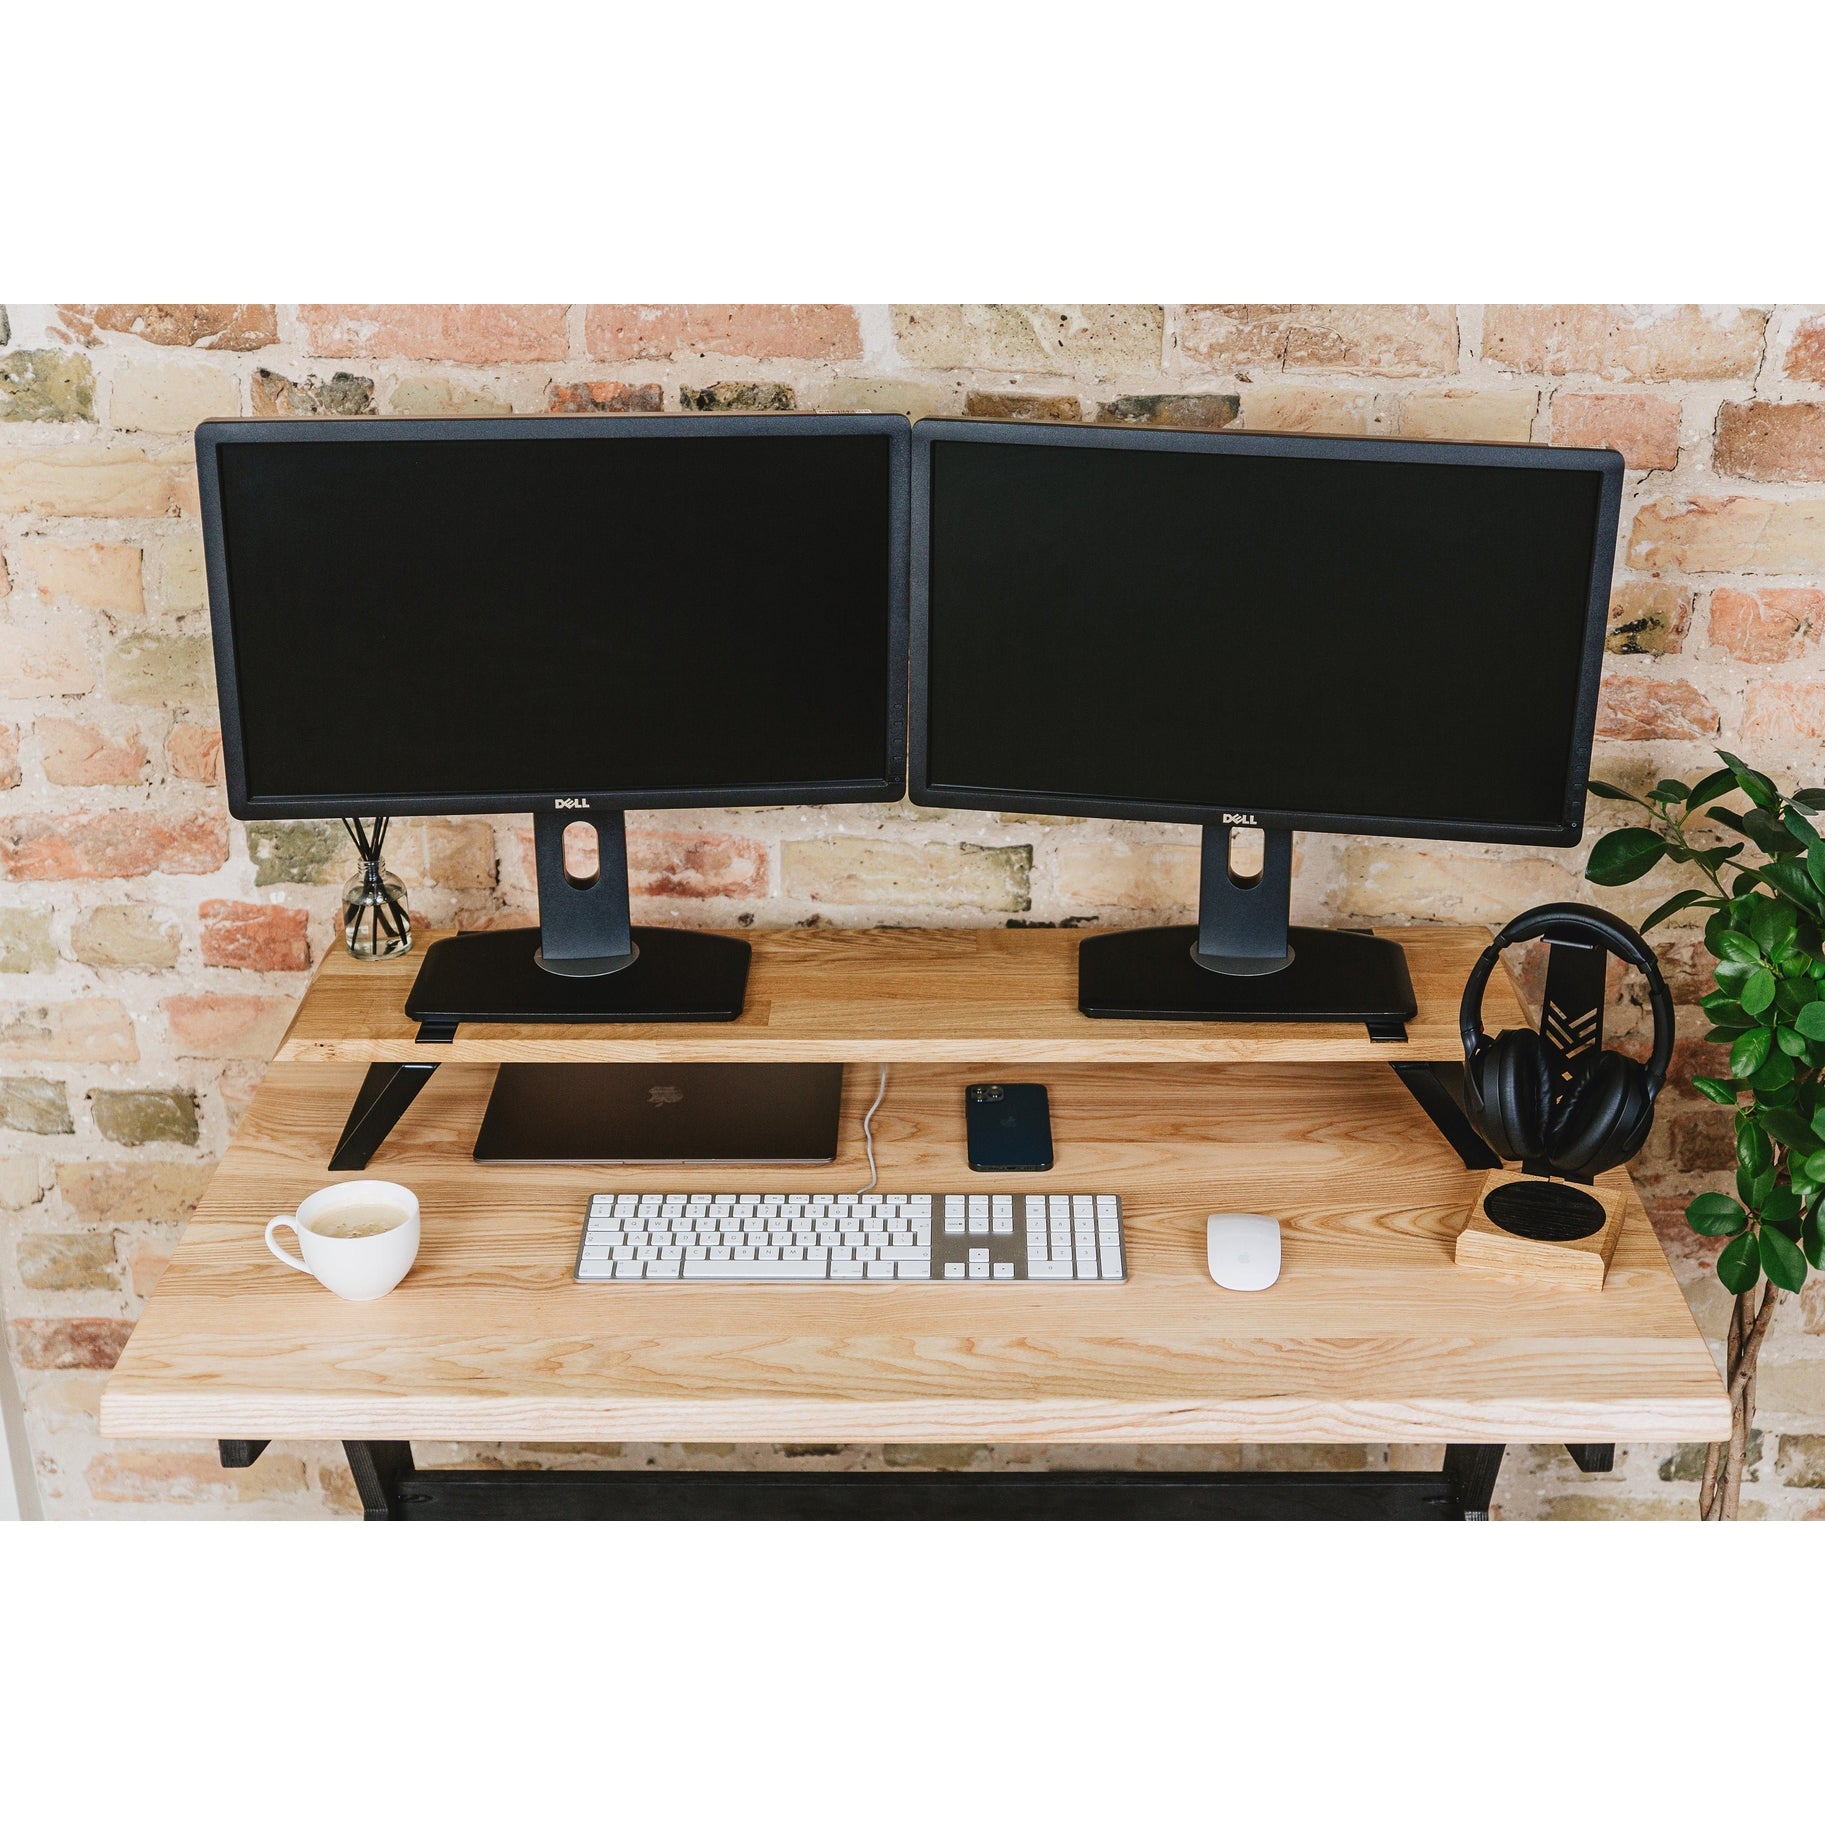 Halostands Dual Monitor Stand on wooden desk with two monitors on top